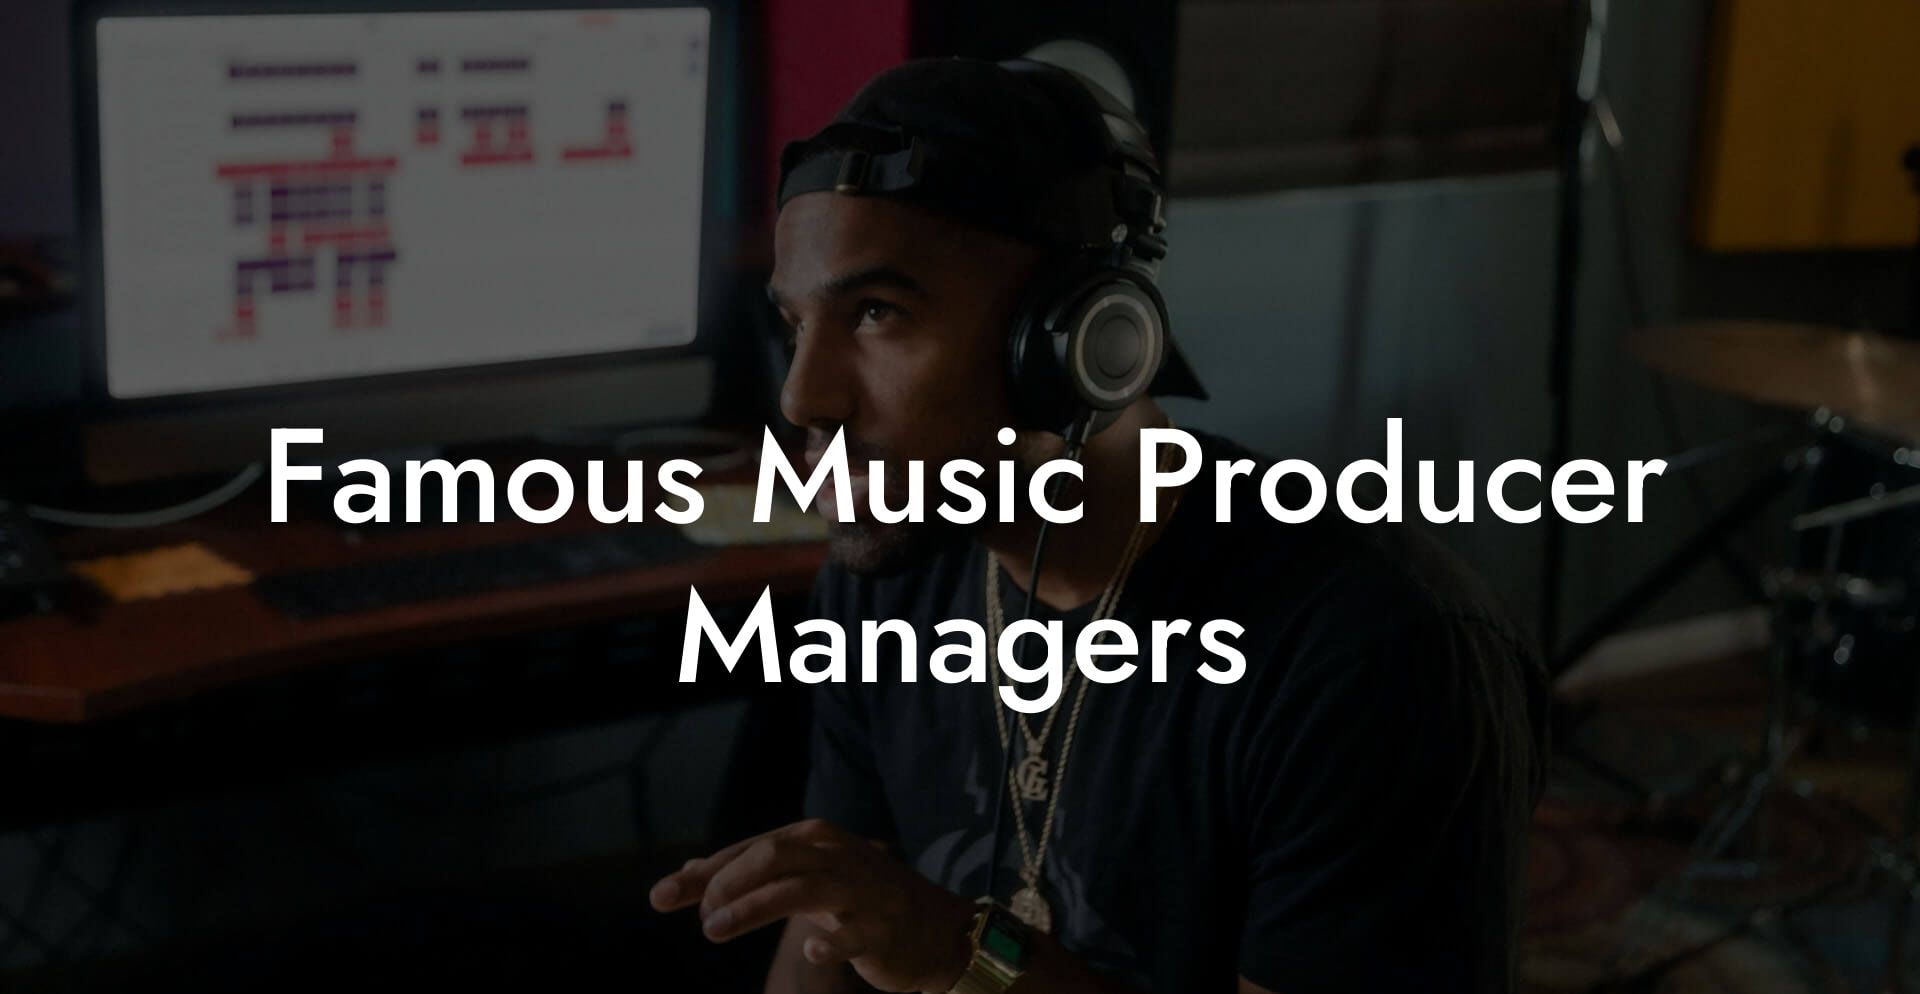 Famous Music Producer Managers